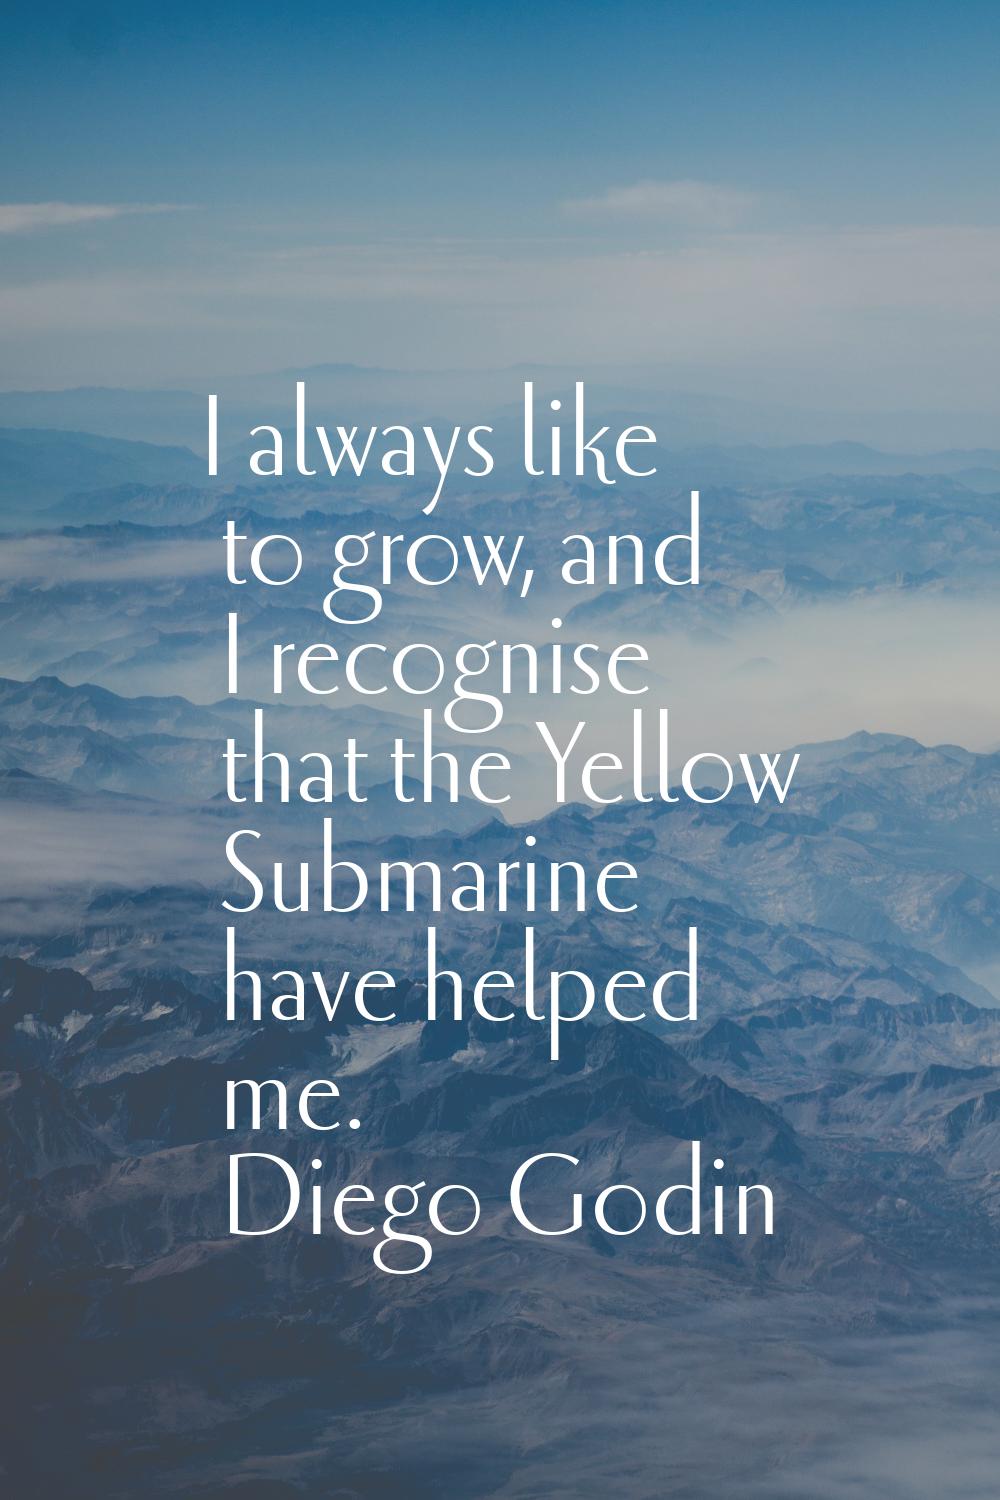 I always like to grow, and I recognise that the Yellow Submarine have helped me.